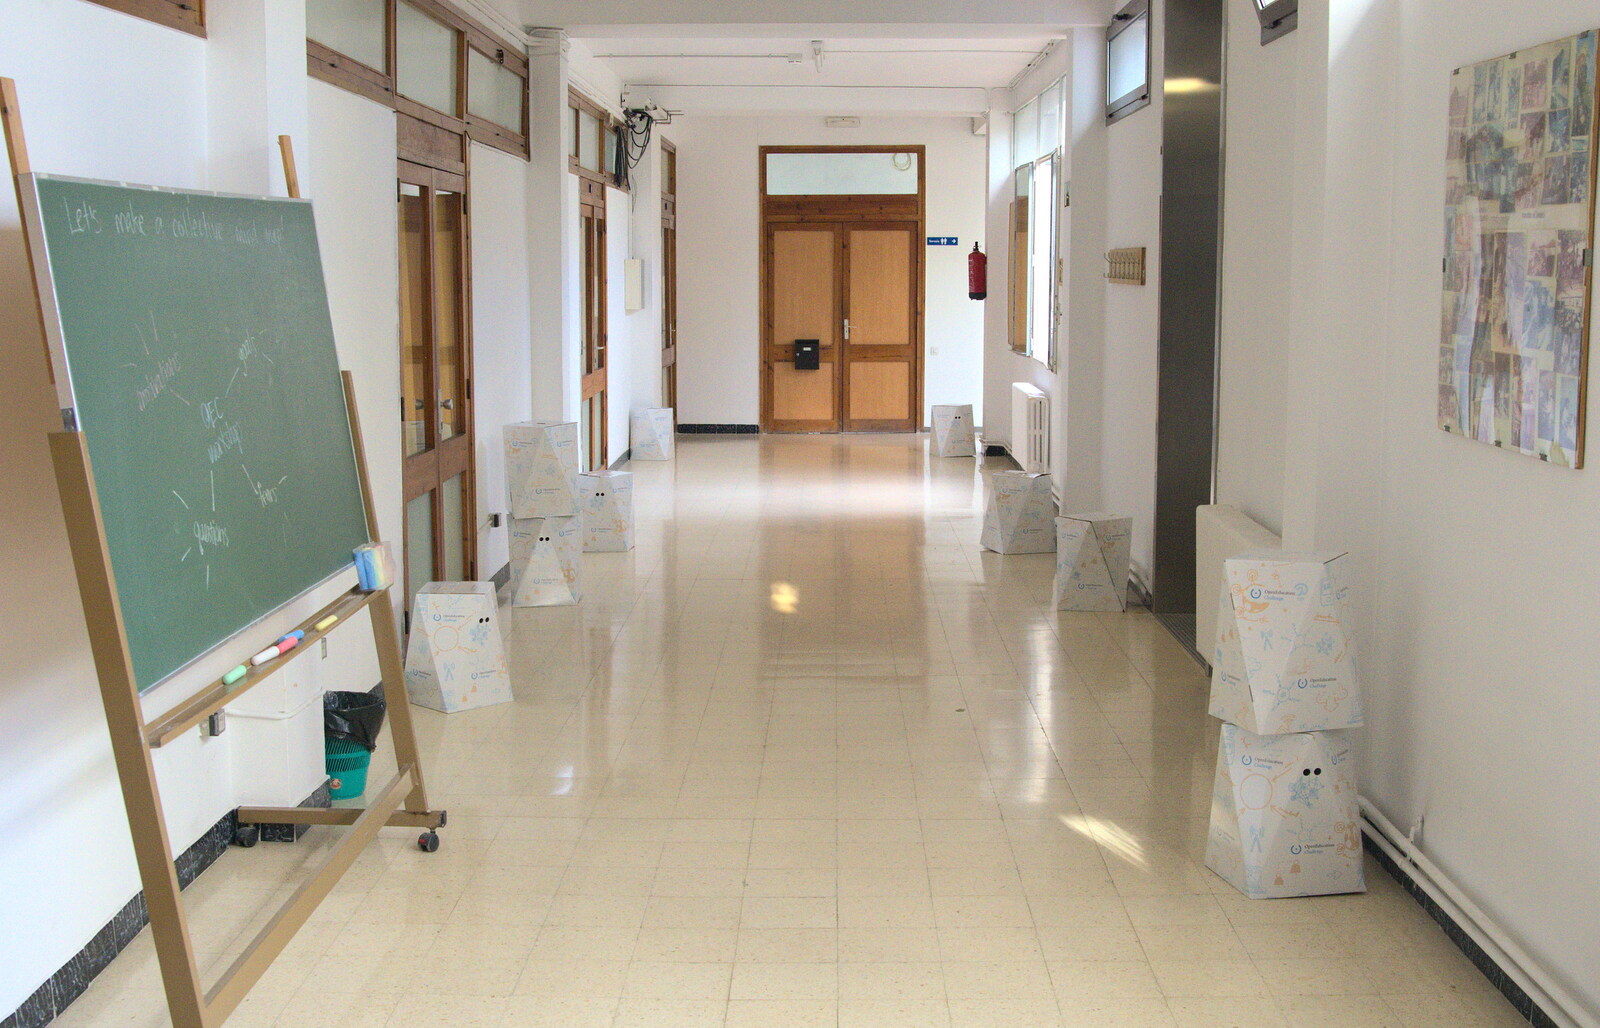 The corridors of Cordola Martí from The Open Education Challenge, Barcelona, Catalonia - 13th July 2014